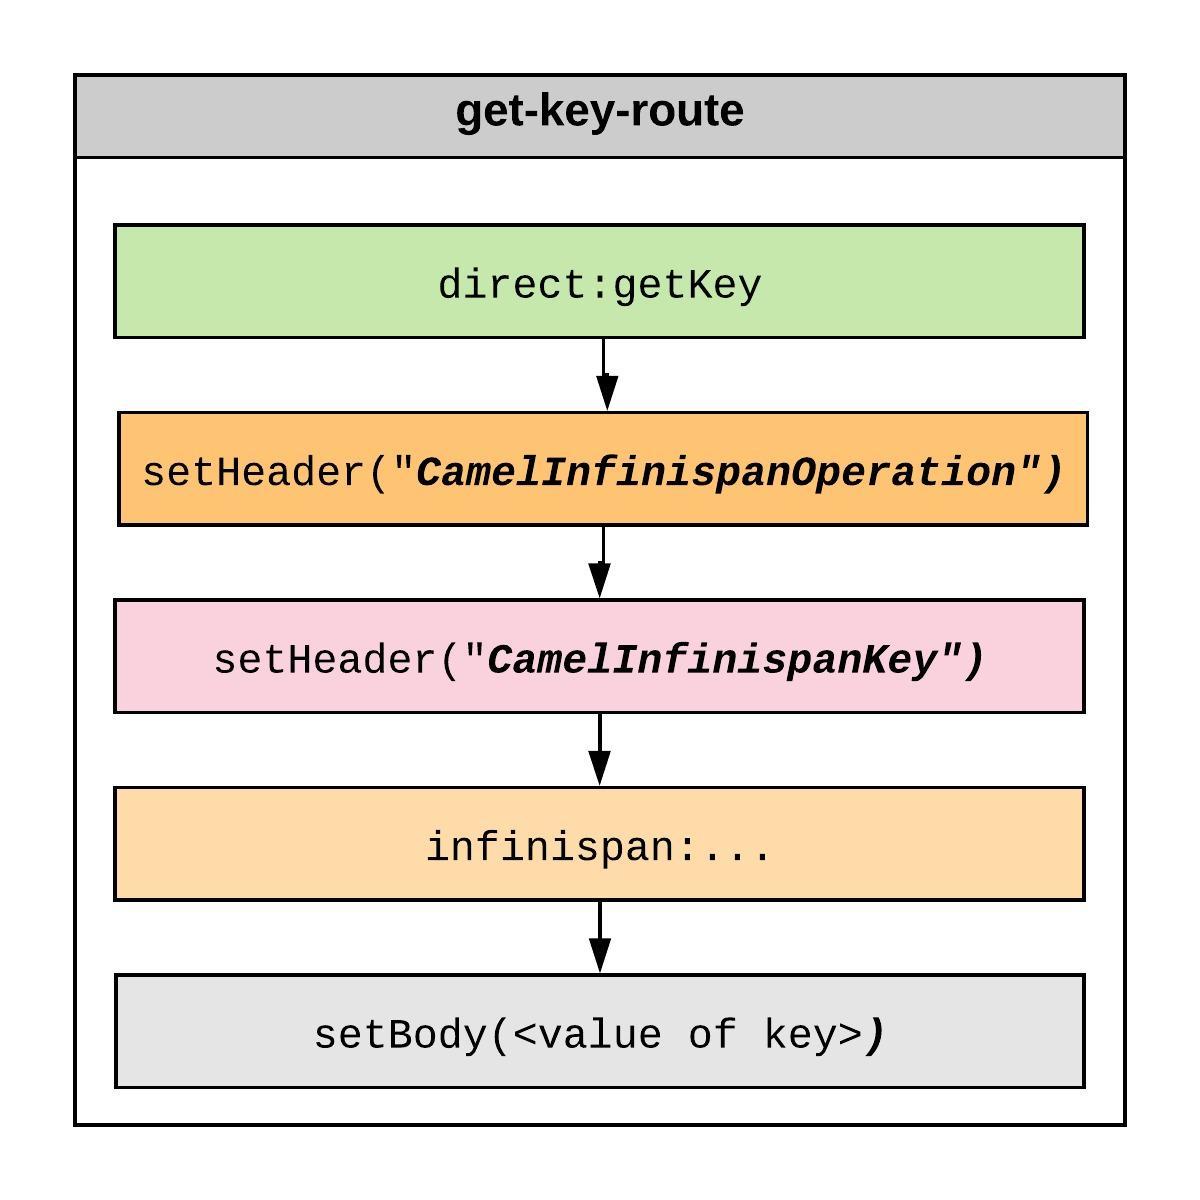 get-key-route